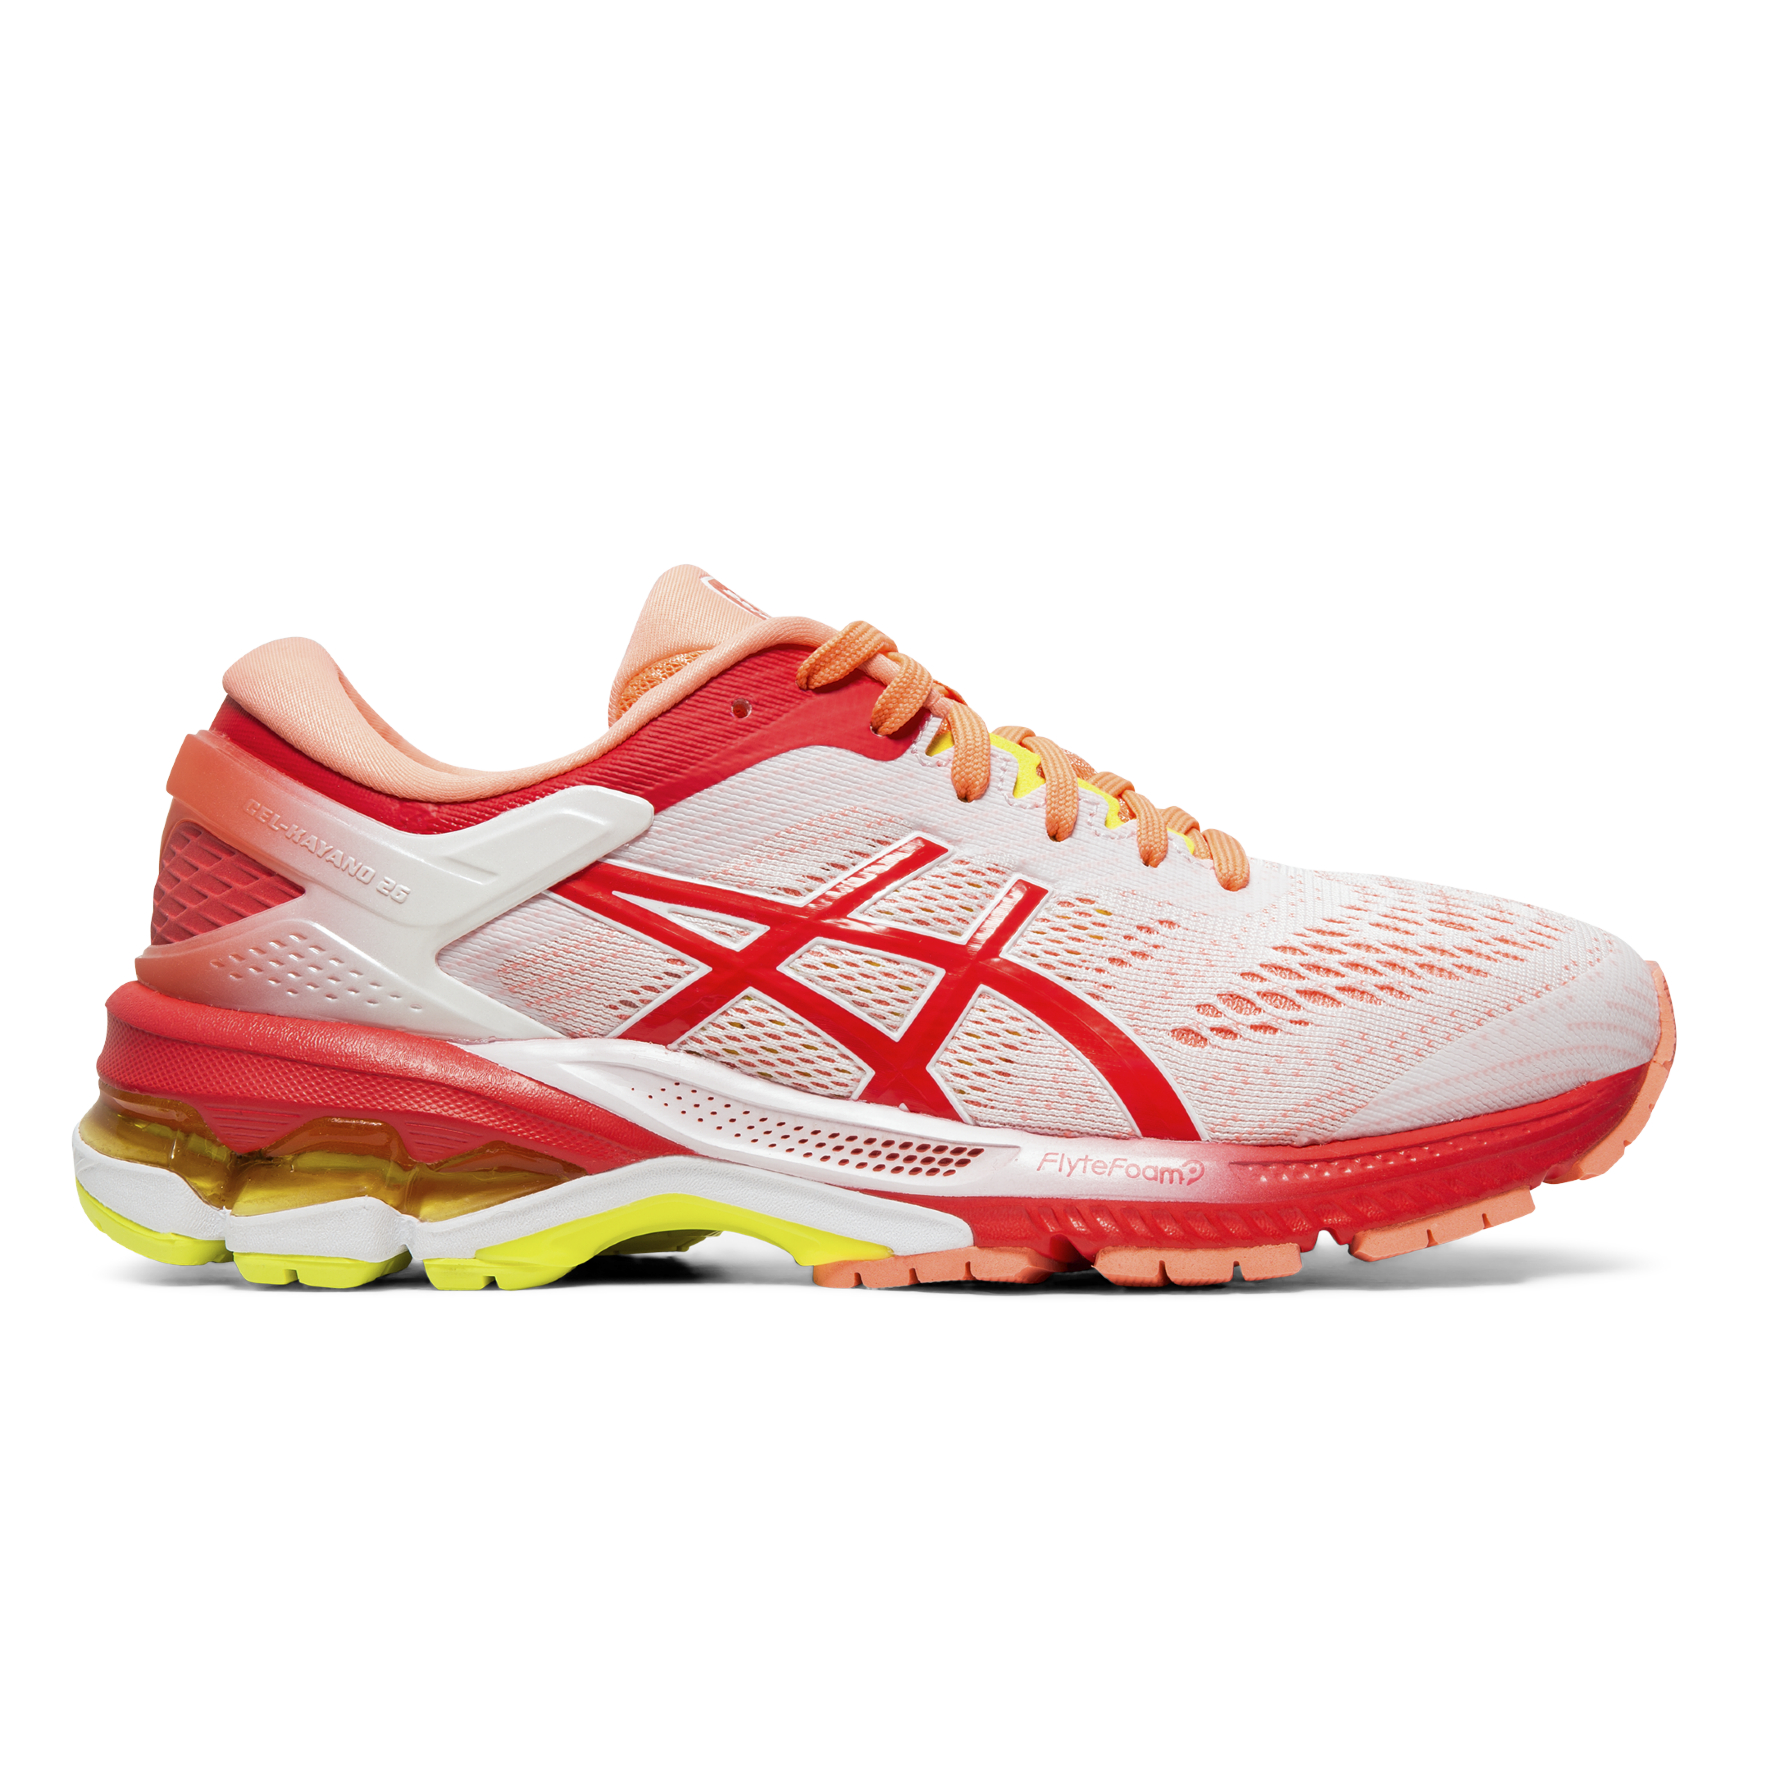 Gel Kayano 26 Dame Cheap Sale, 56% OFF | empow-her.com